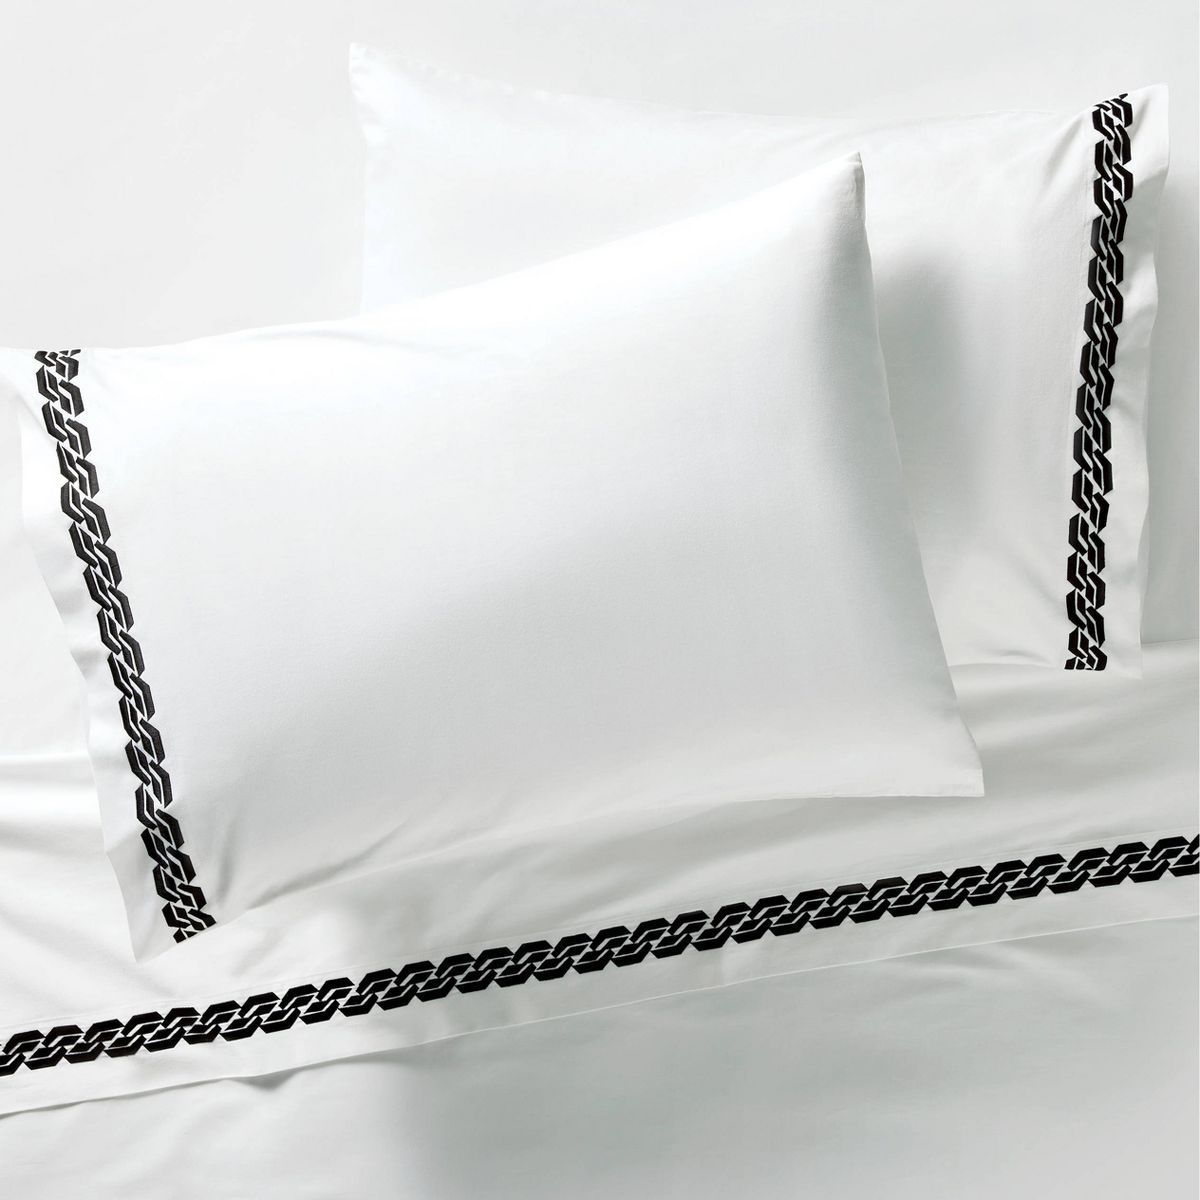 Black Chain Embroidery 400 Thread Count Bedding Sheet Set - DVF for Target | Target